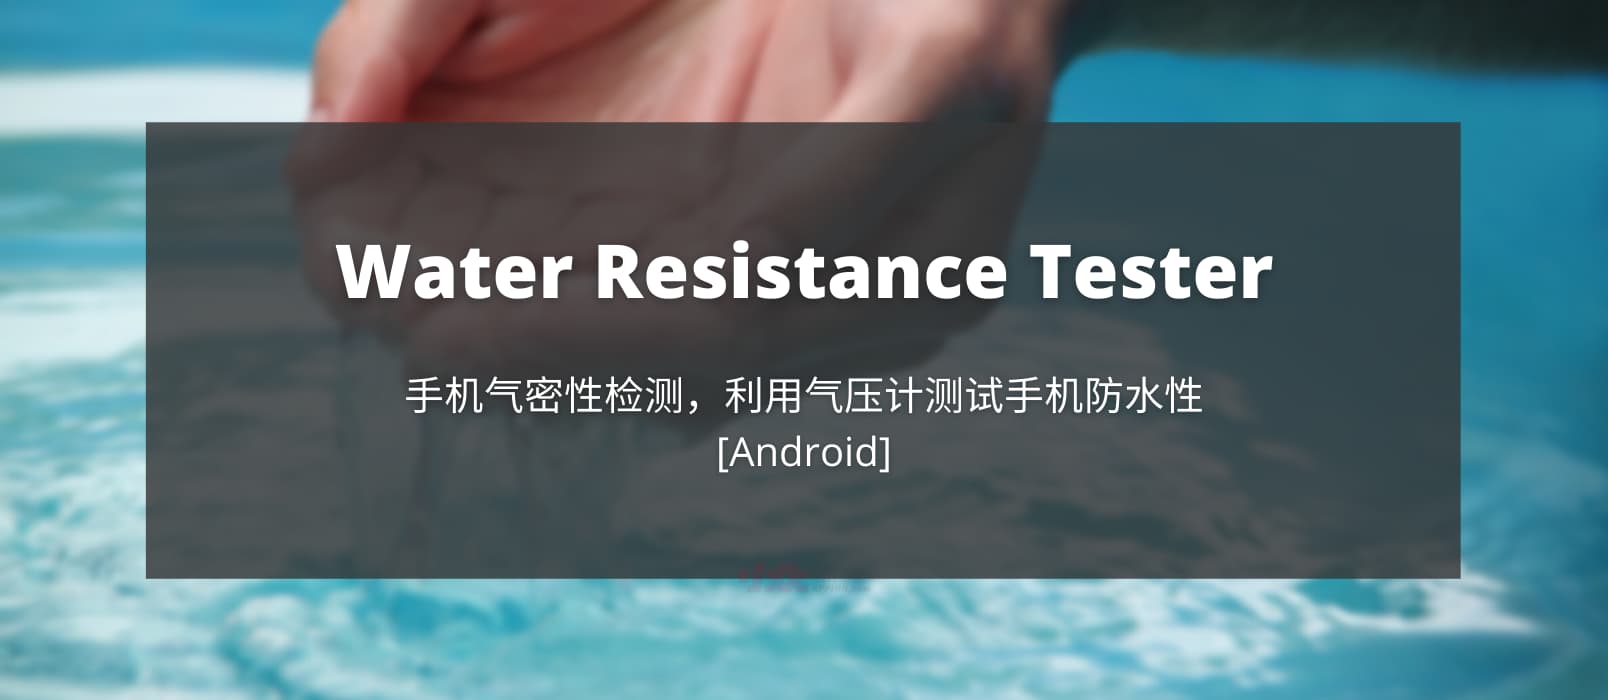 Water Resistance Tester - 手机气密性检测，根据气压计测试手机防水性[Android]